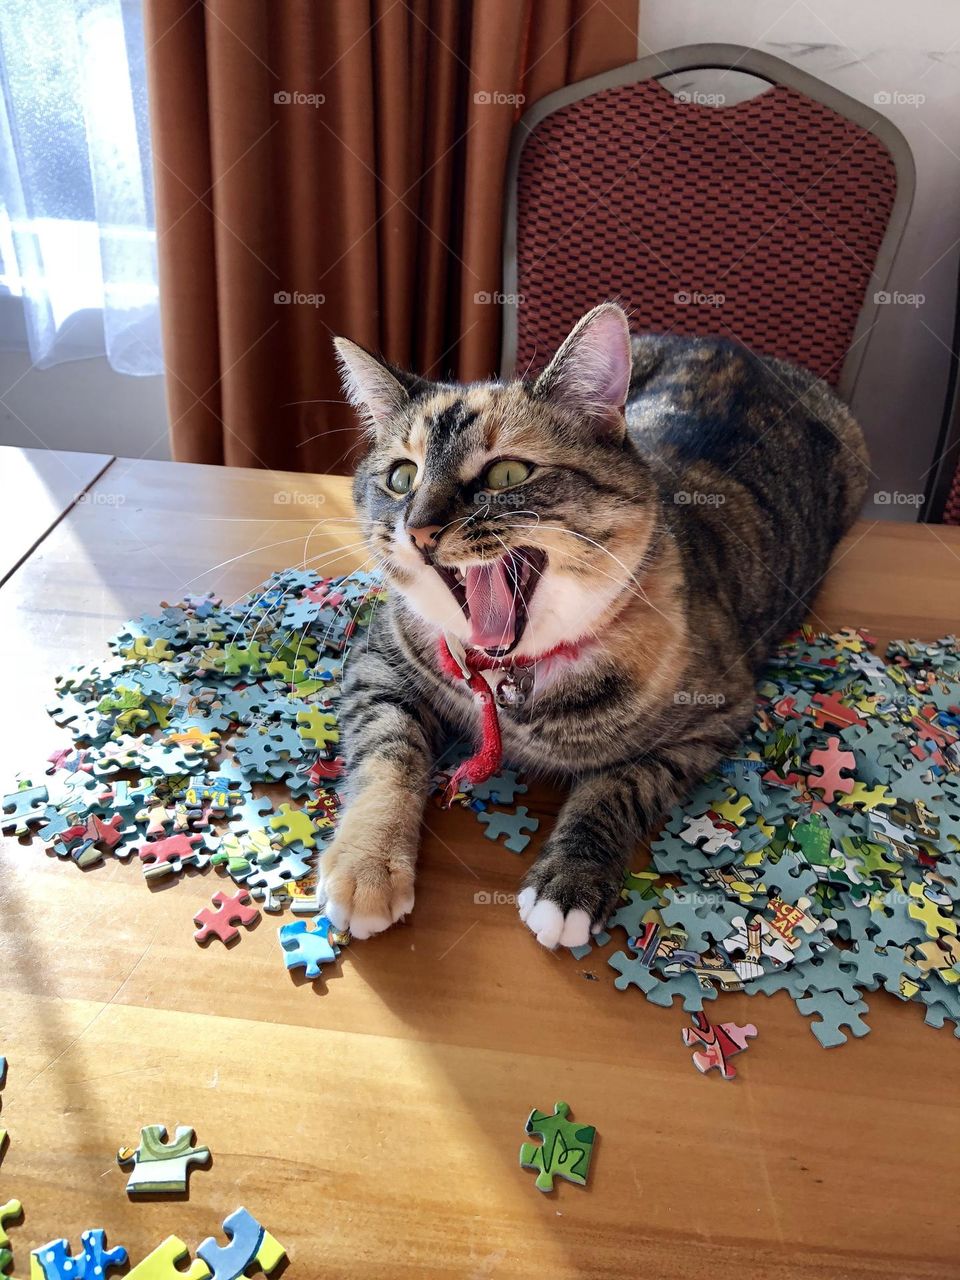 Phoebe the torby yawns and ends up looking ecstatic about working on a puzzle